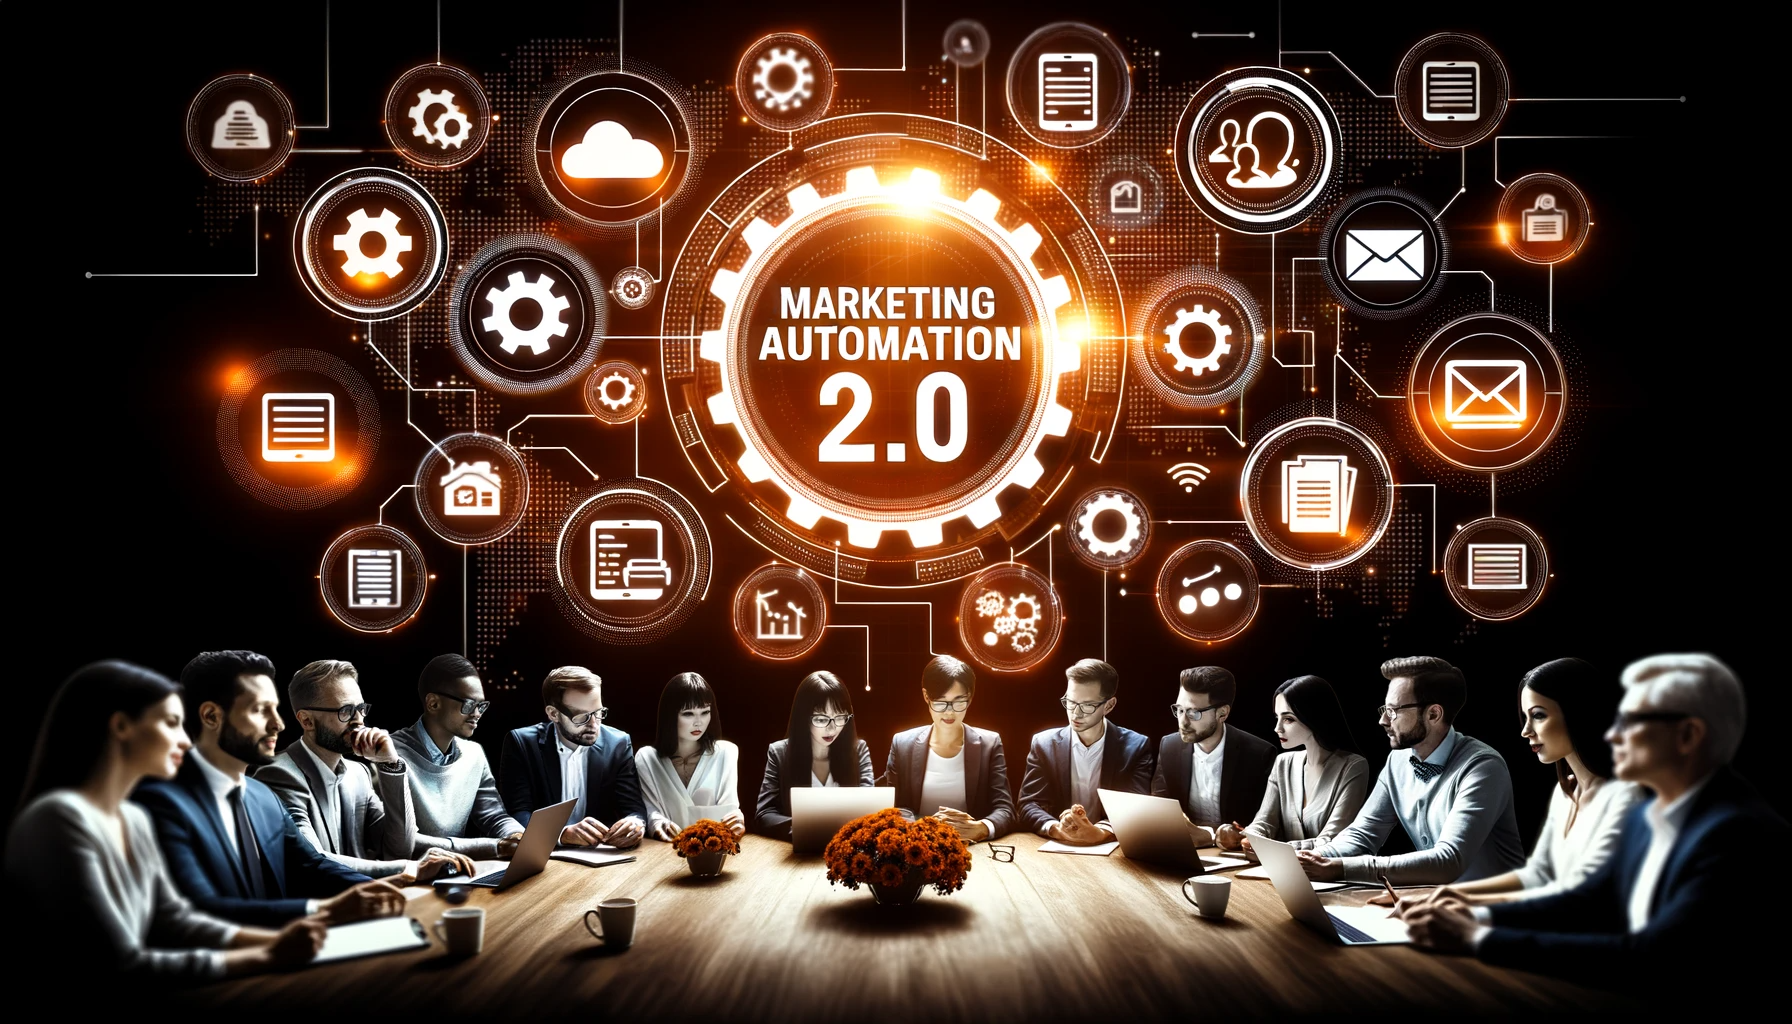 Cover Image for Marketing Automation 2.0 - The Future Beyond Hubspot and Salesforce